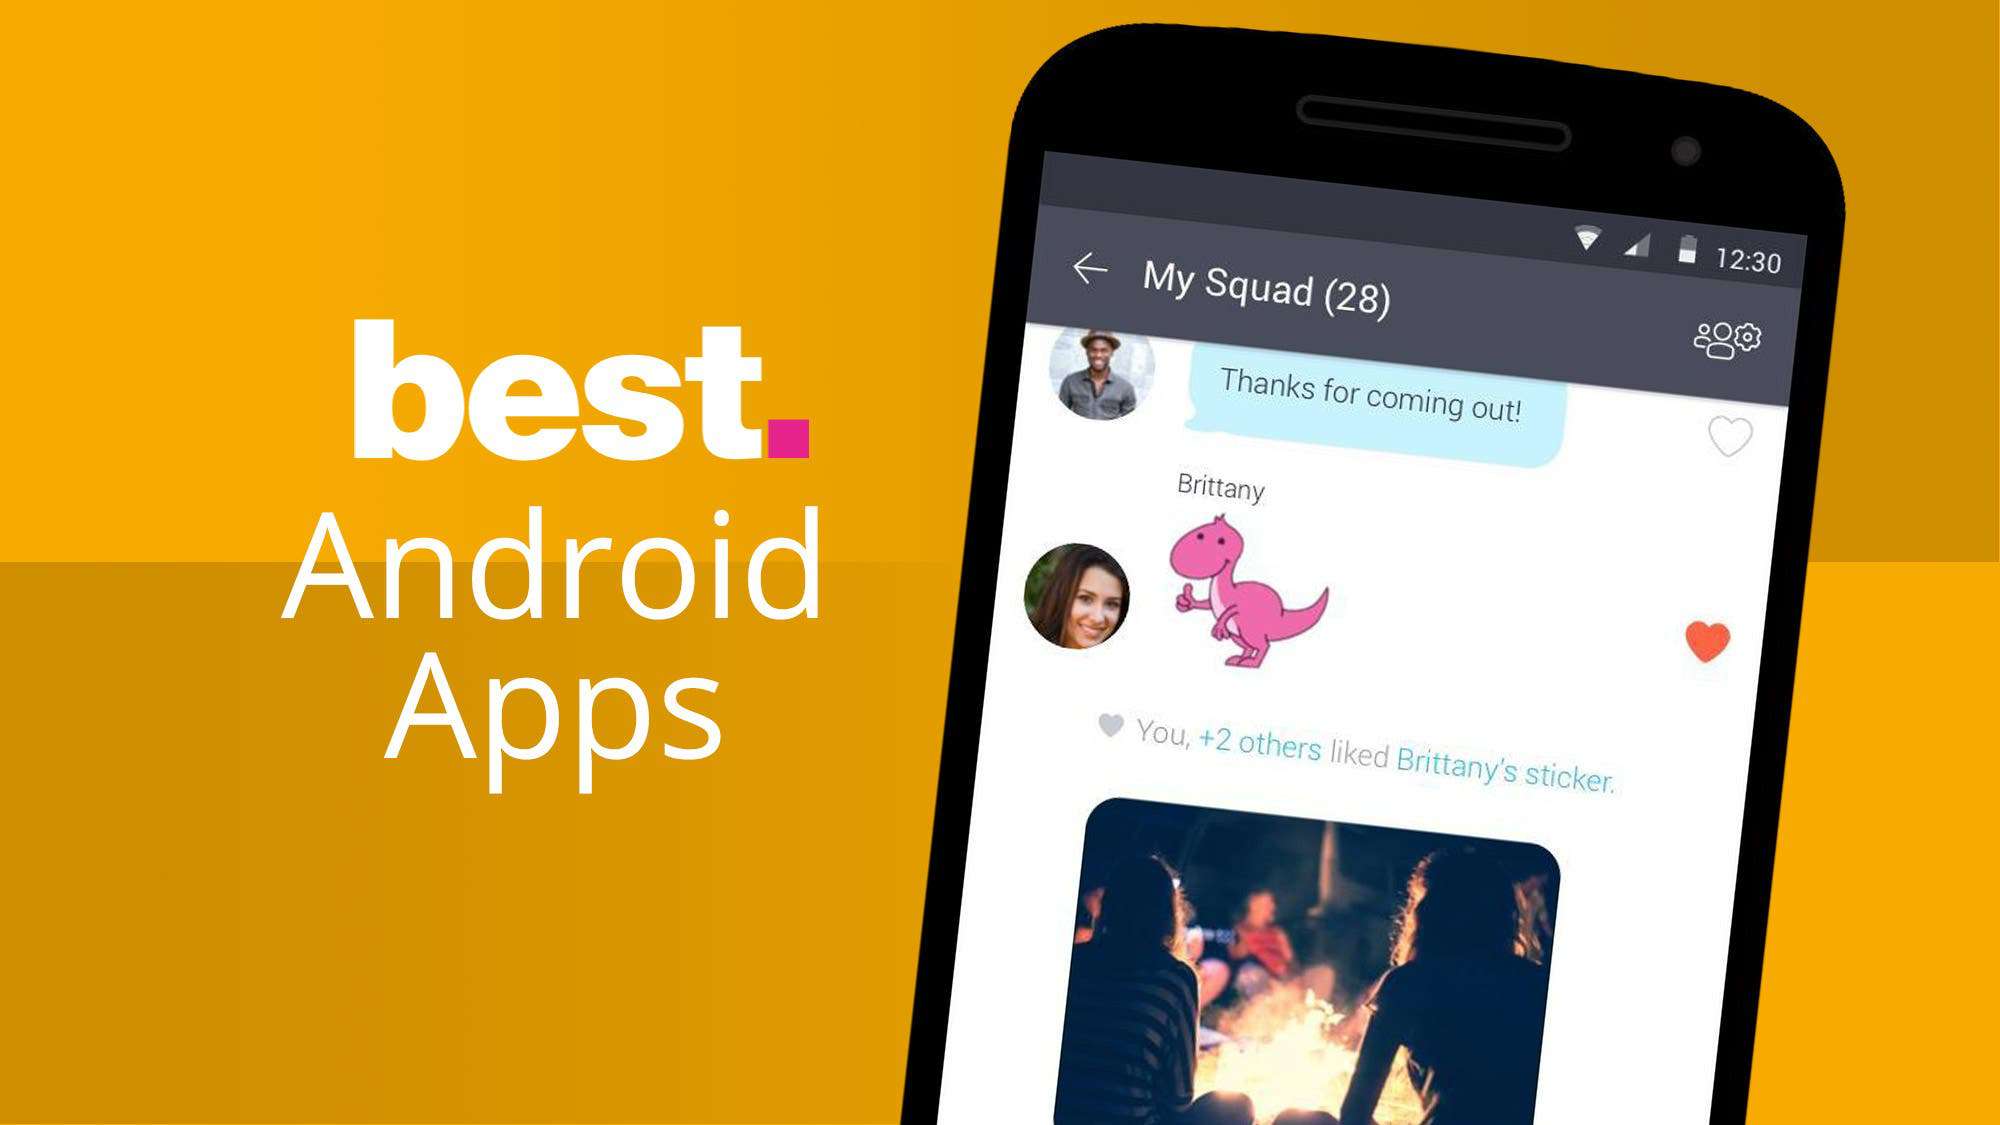 Top 10 best Android Apps you can try out for FREE in 2022 - Gizchina.com